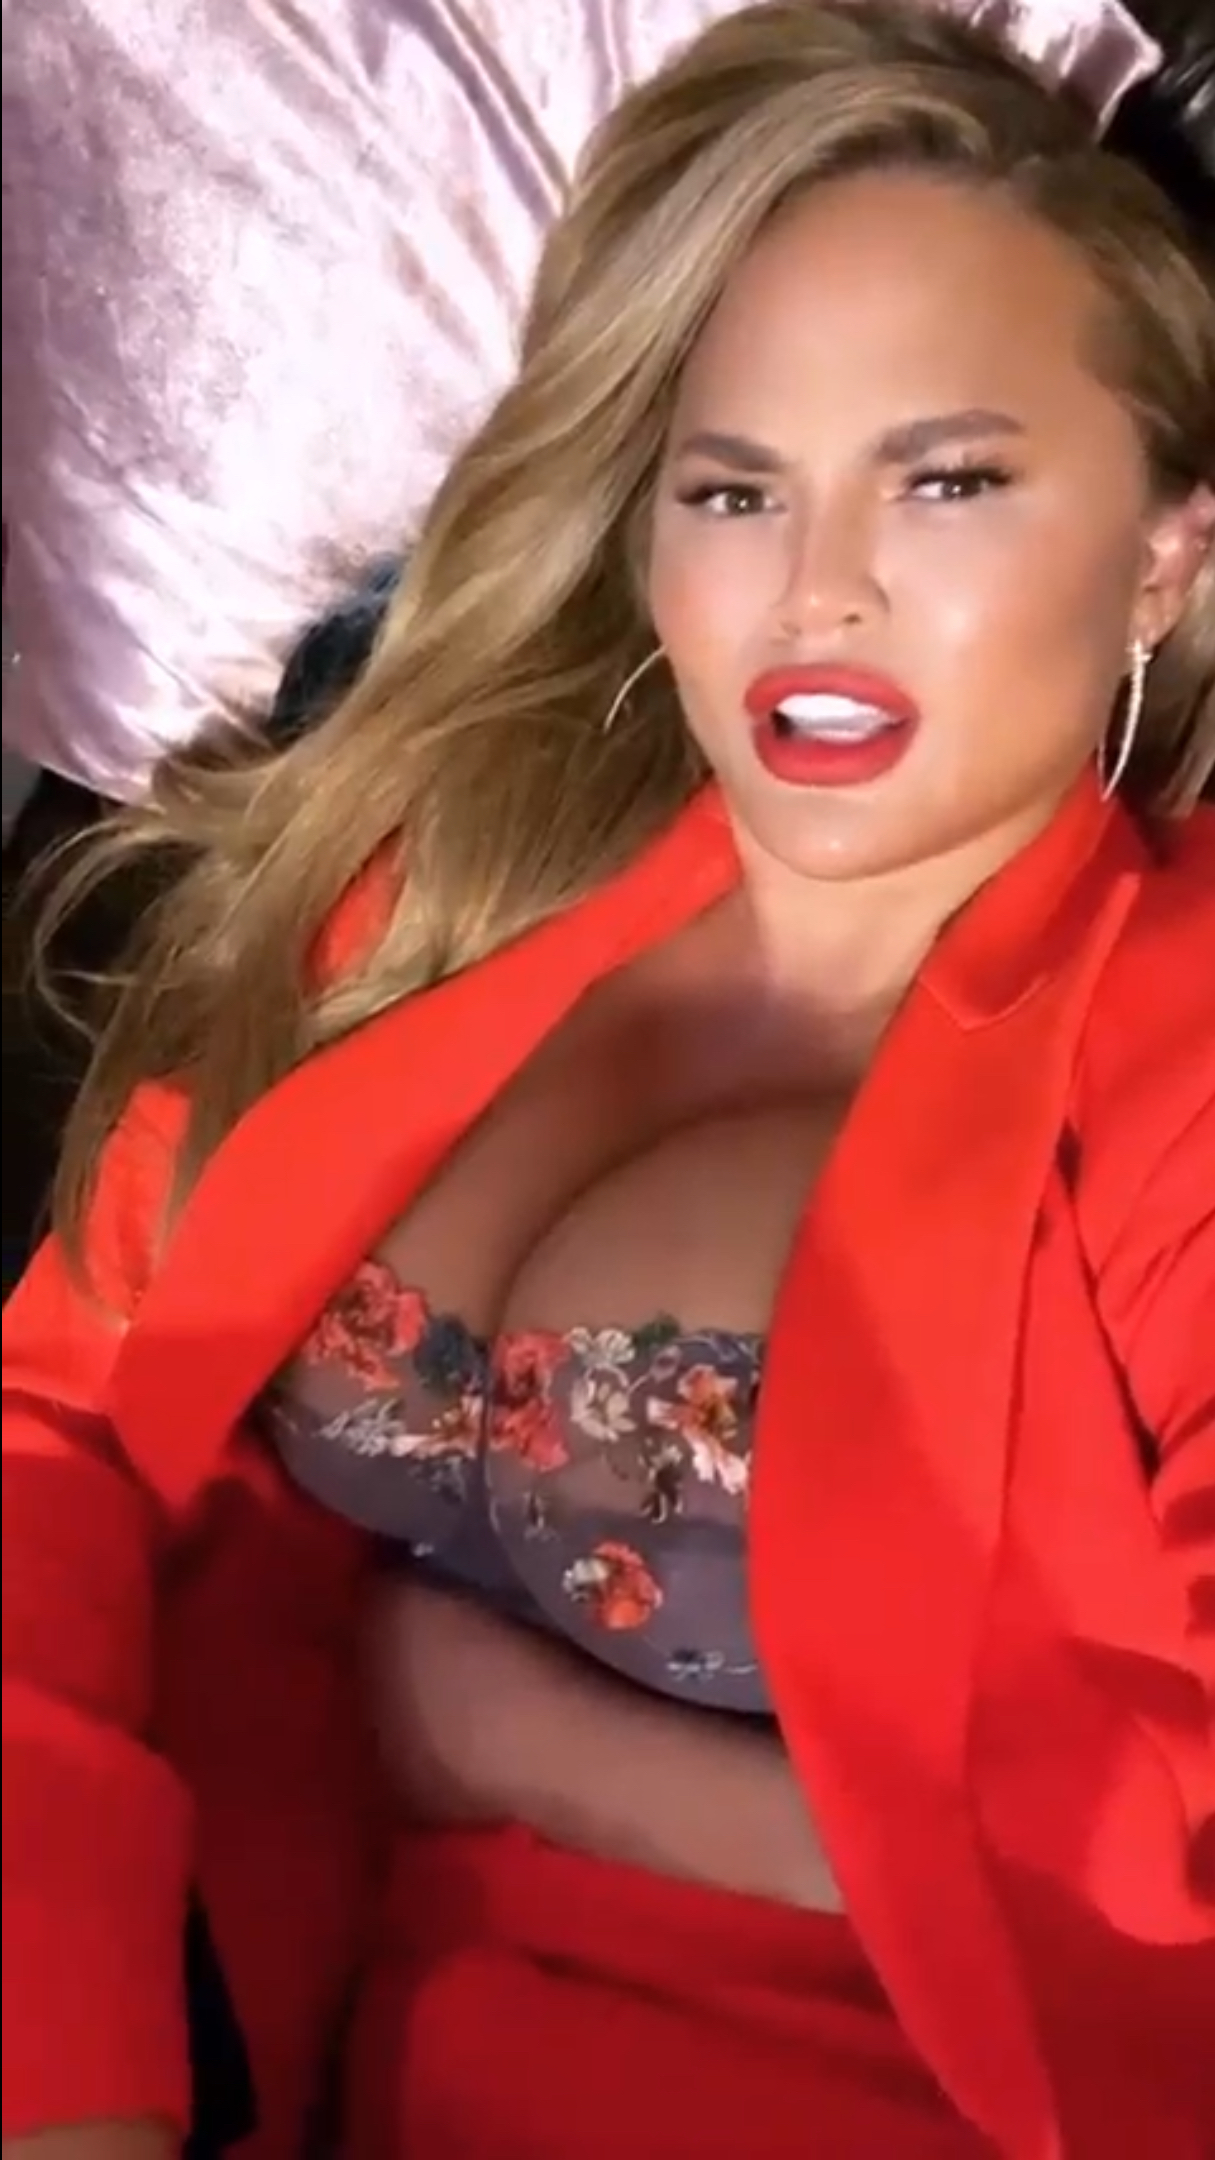 Chesty Lady Chrissy Teigen Displaying Her Wonderful Cleavage in a Brazen Outfit